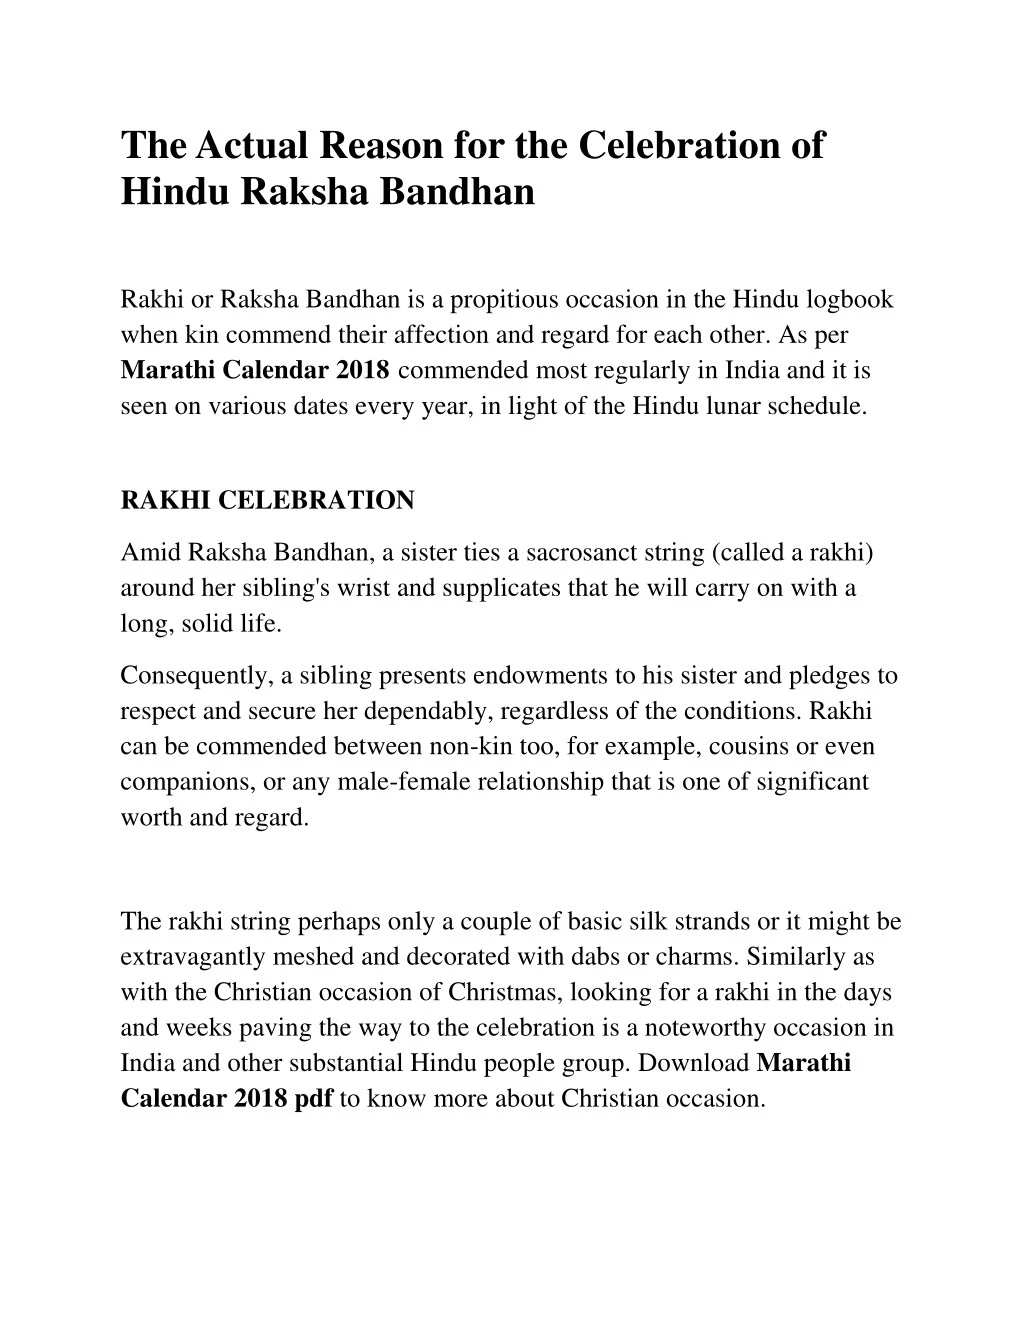 the actual reason for the celebration of hindu